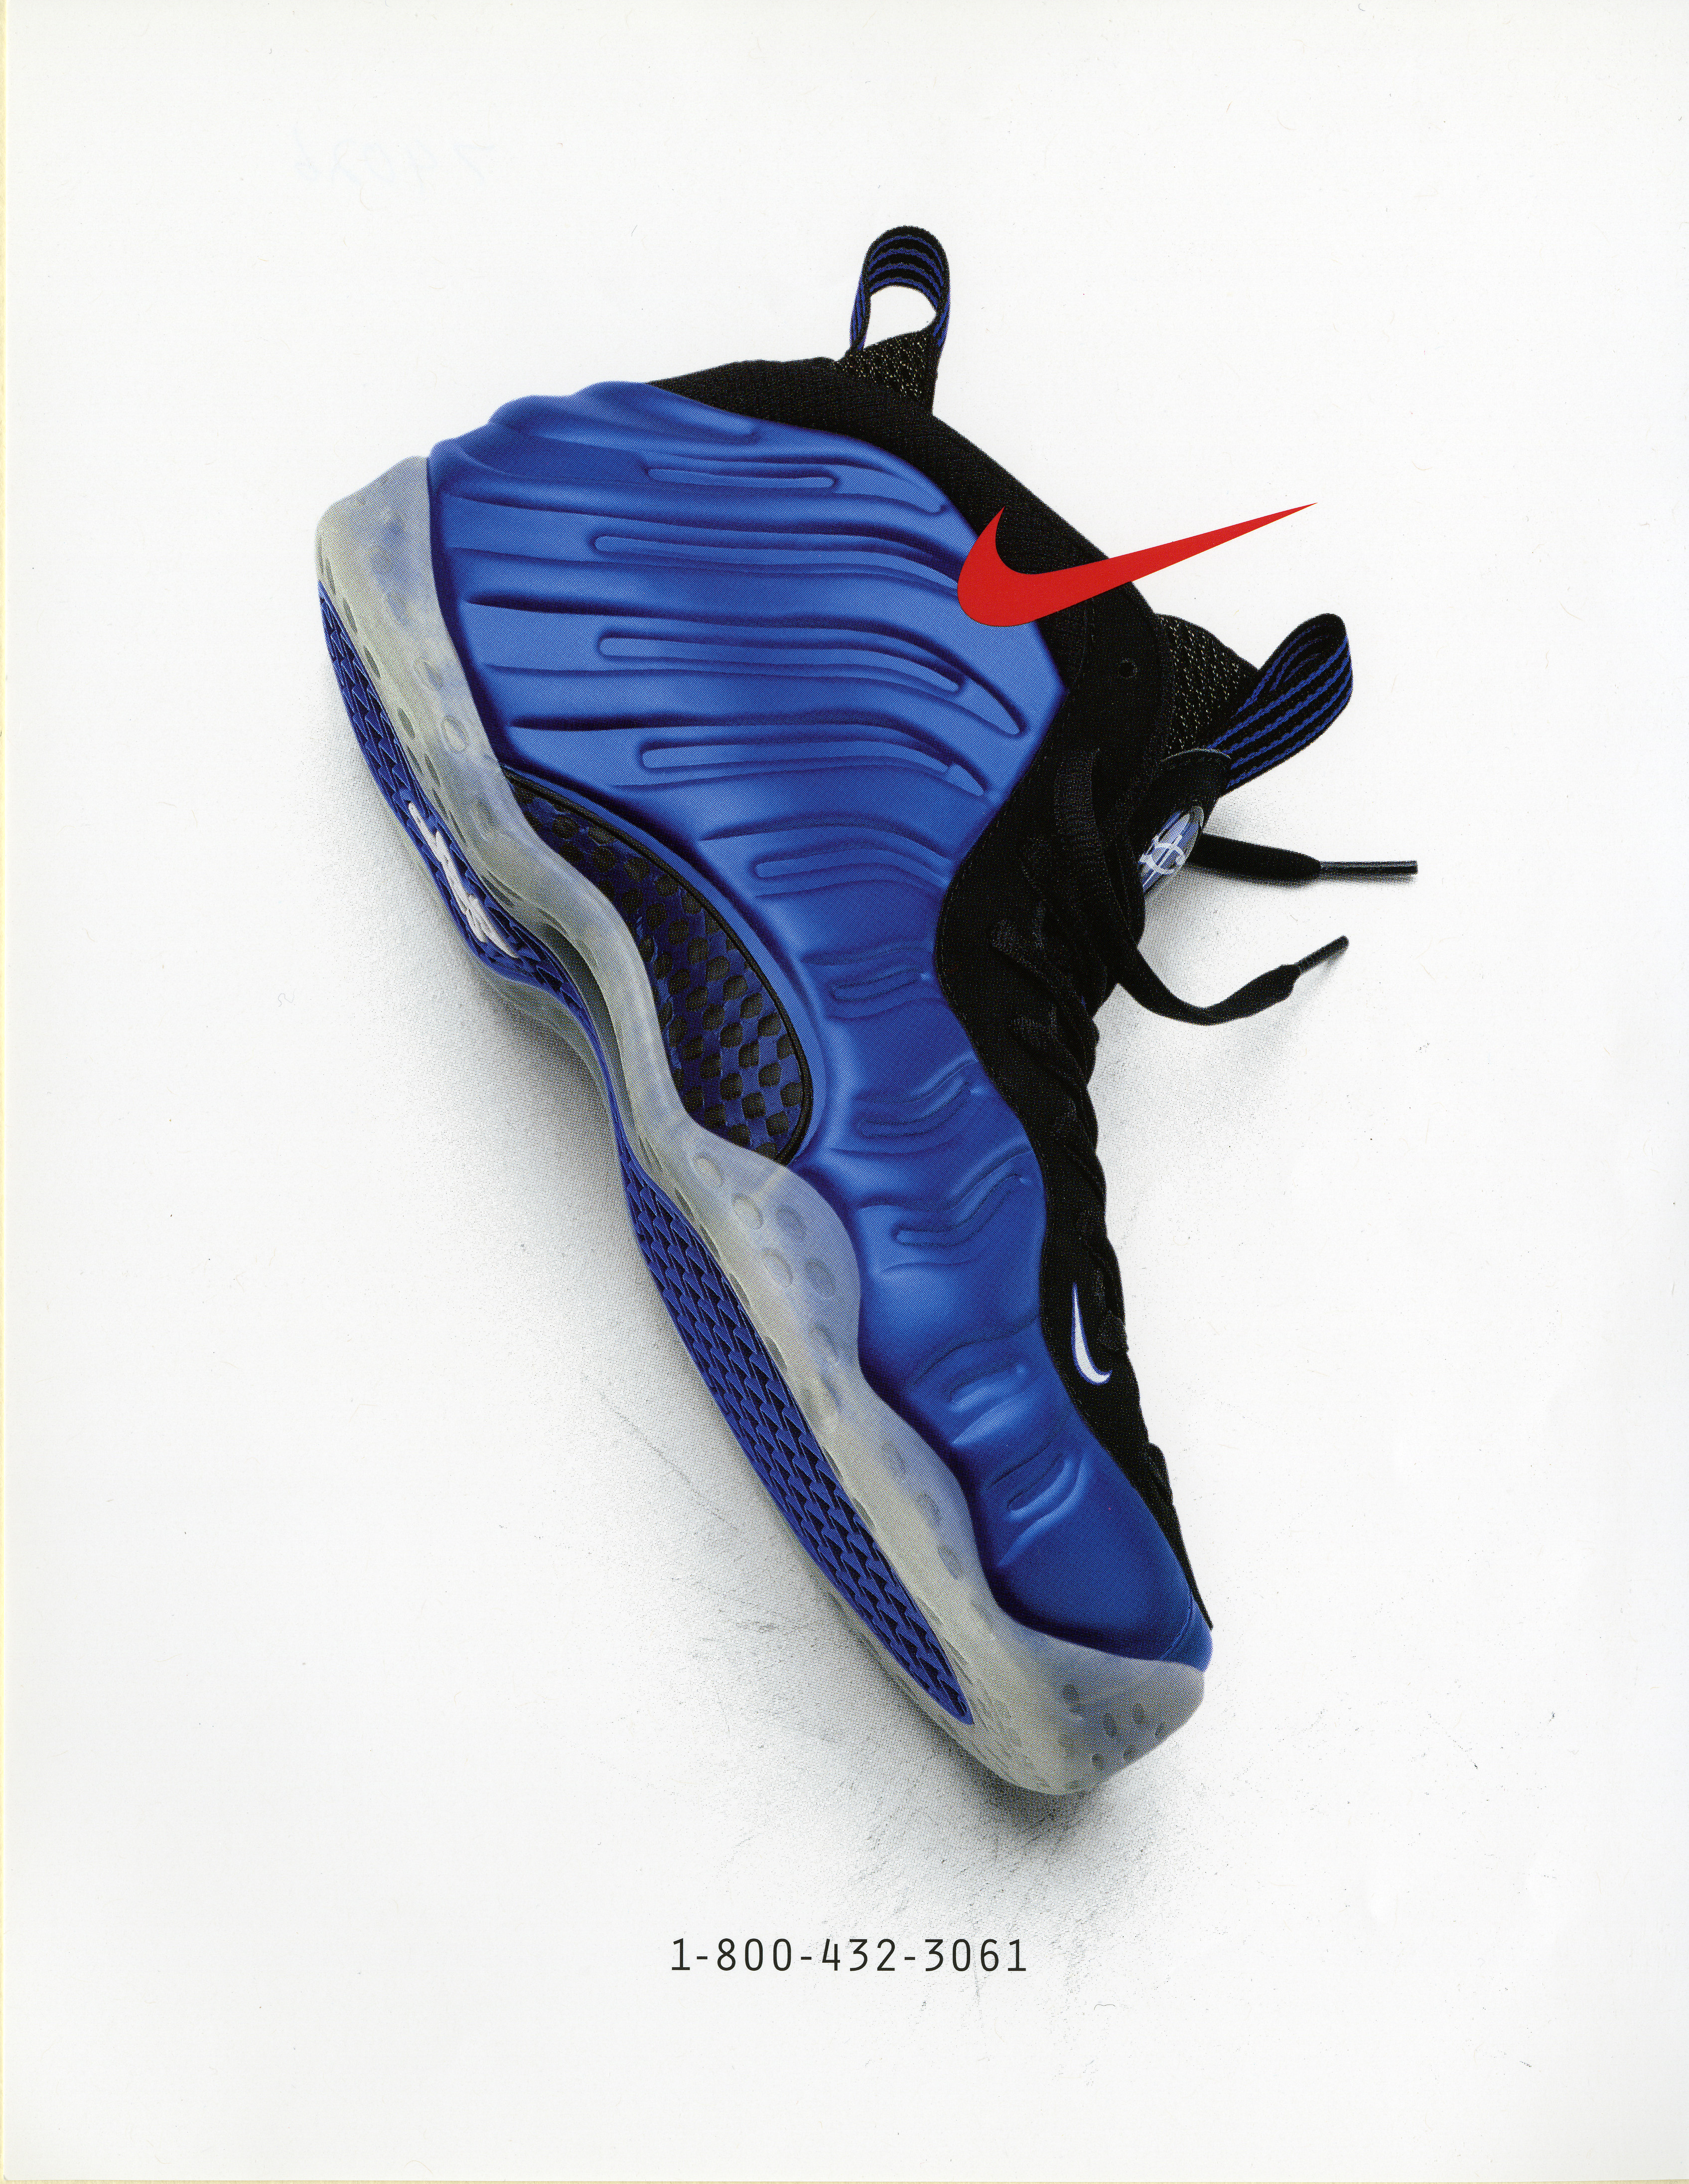 20 Things You Didn't Know About the Nike Foamposite